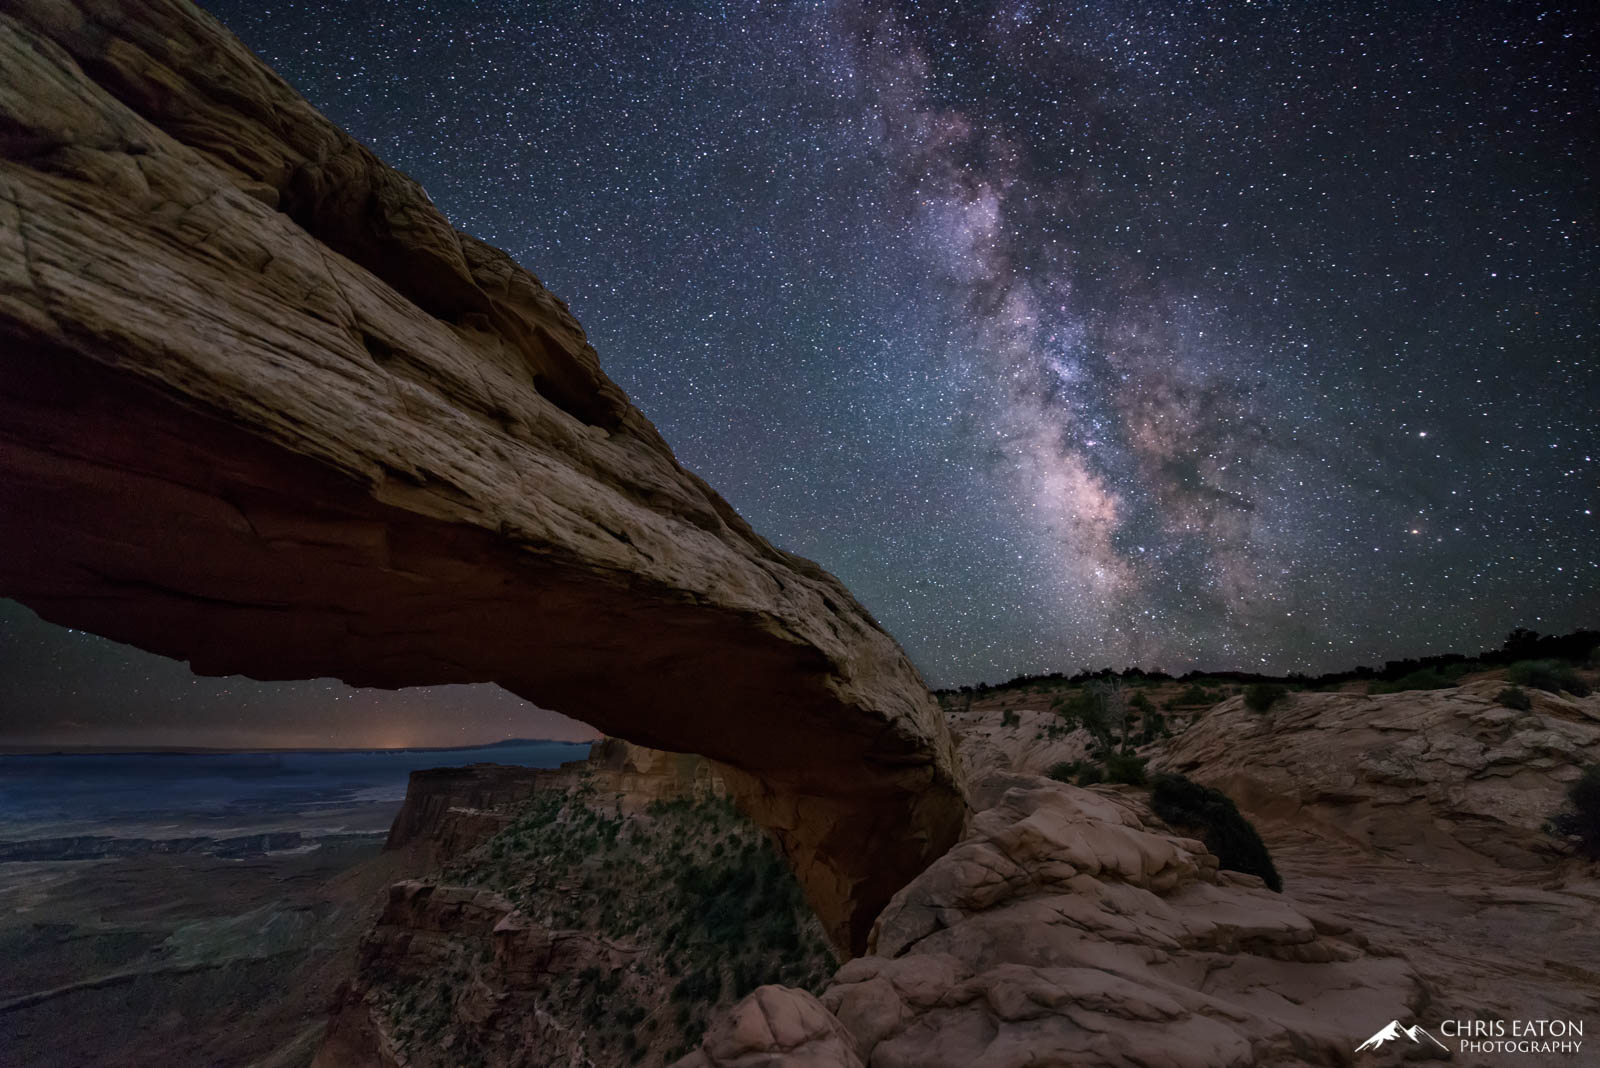 The Milky Way rises above Mesa Arch in Canyonlands National Park